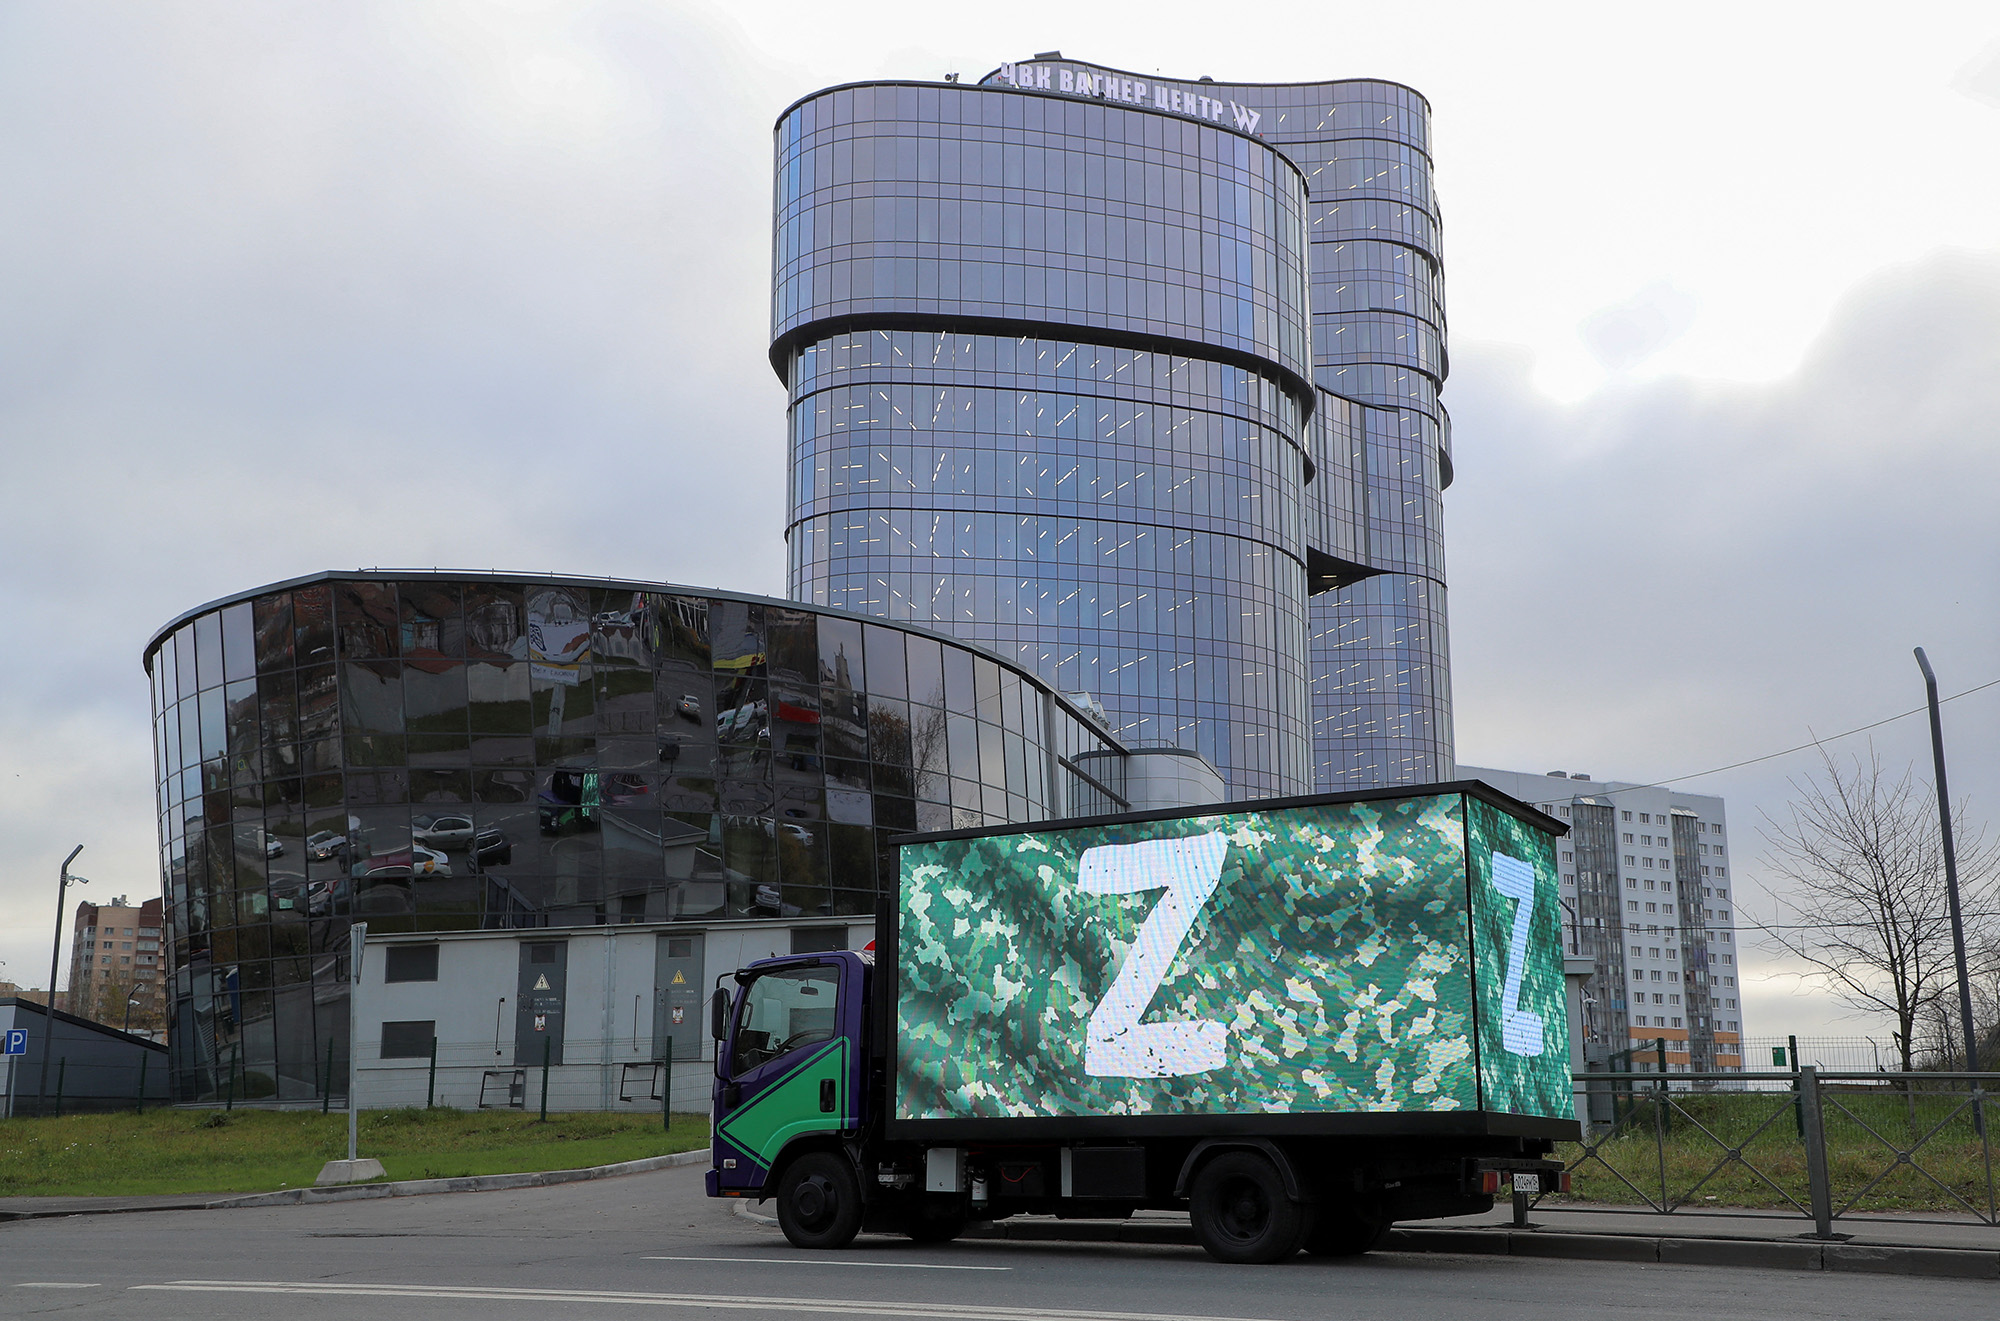 A truck displaying the symbols "Z" in support of the Russian armed forces involved in a military conflict in Ukraine is parked outside PMC Wagner Centre during the official opening of the office block in Saint Petersburg, Russia, on November 4.